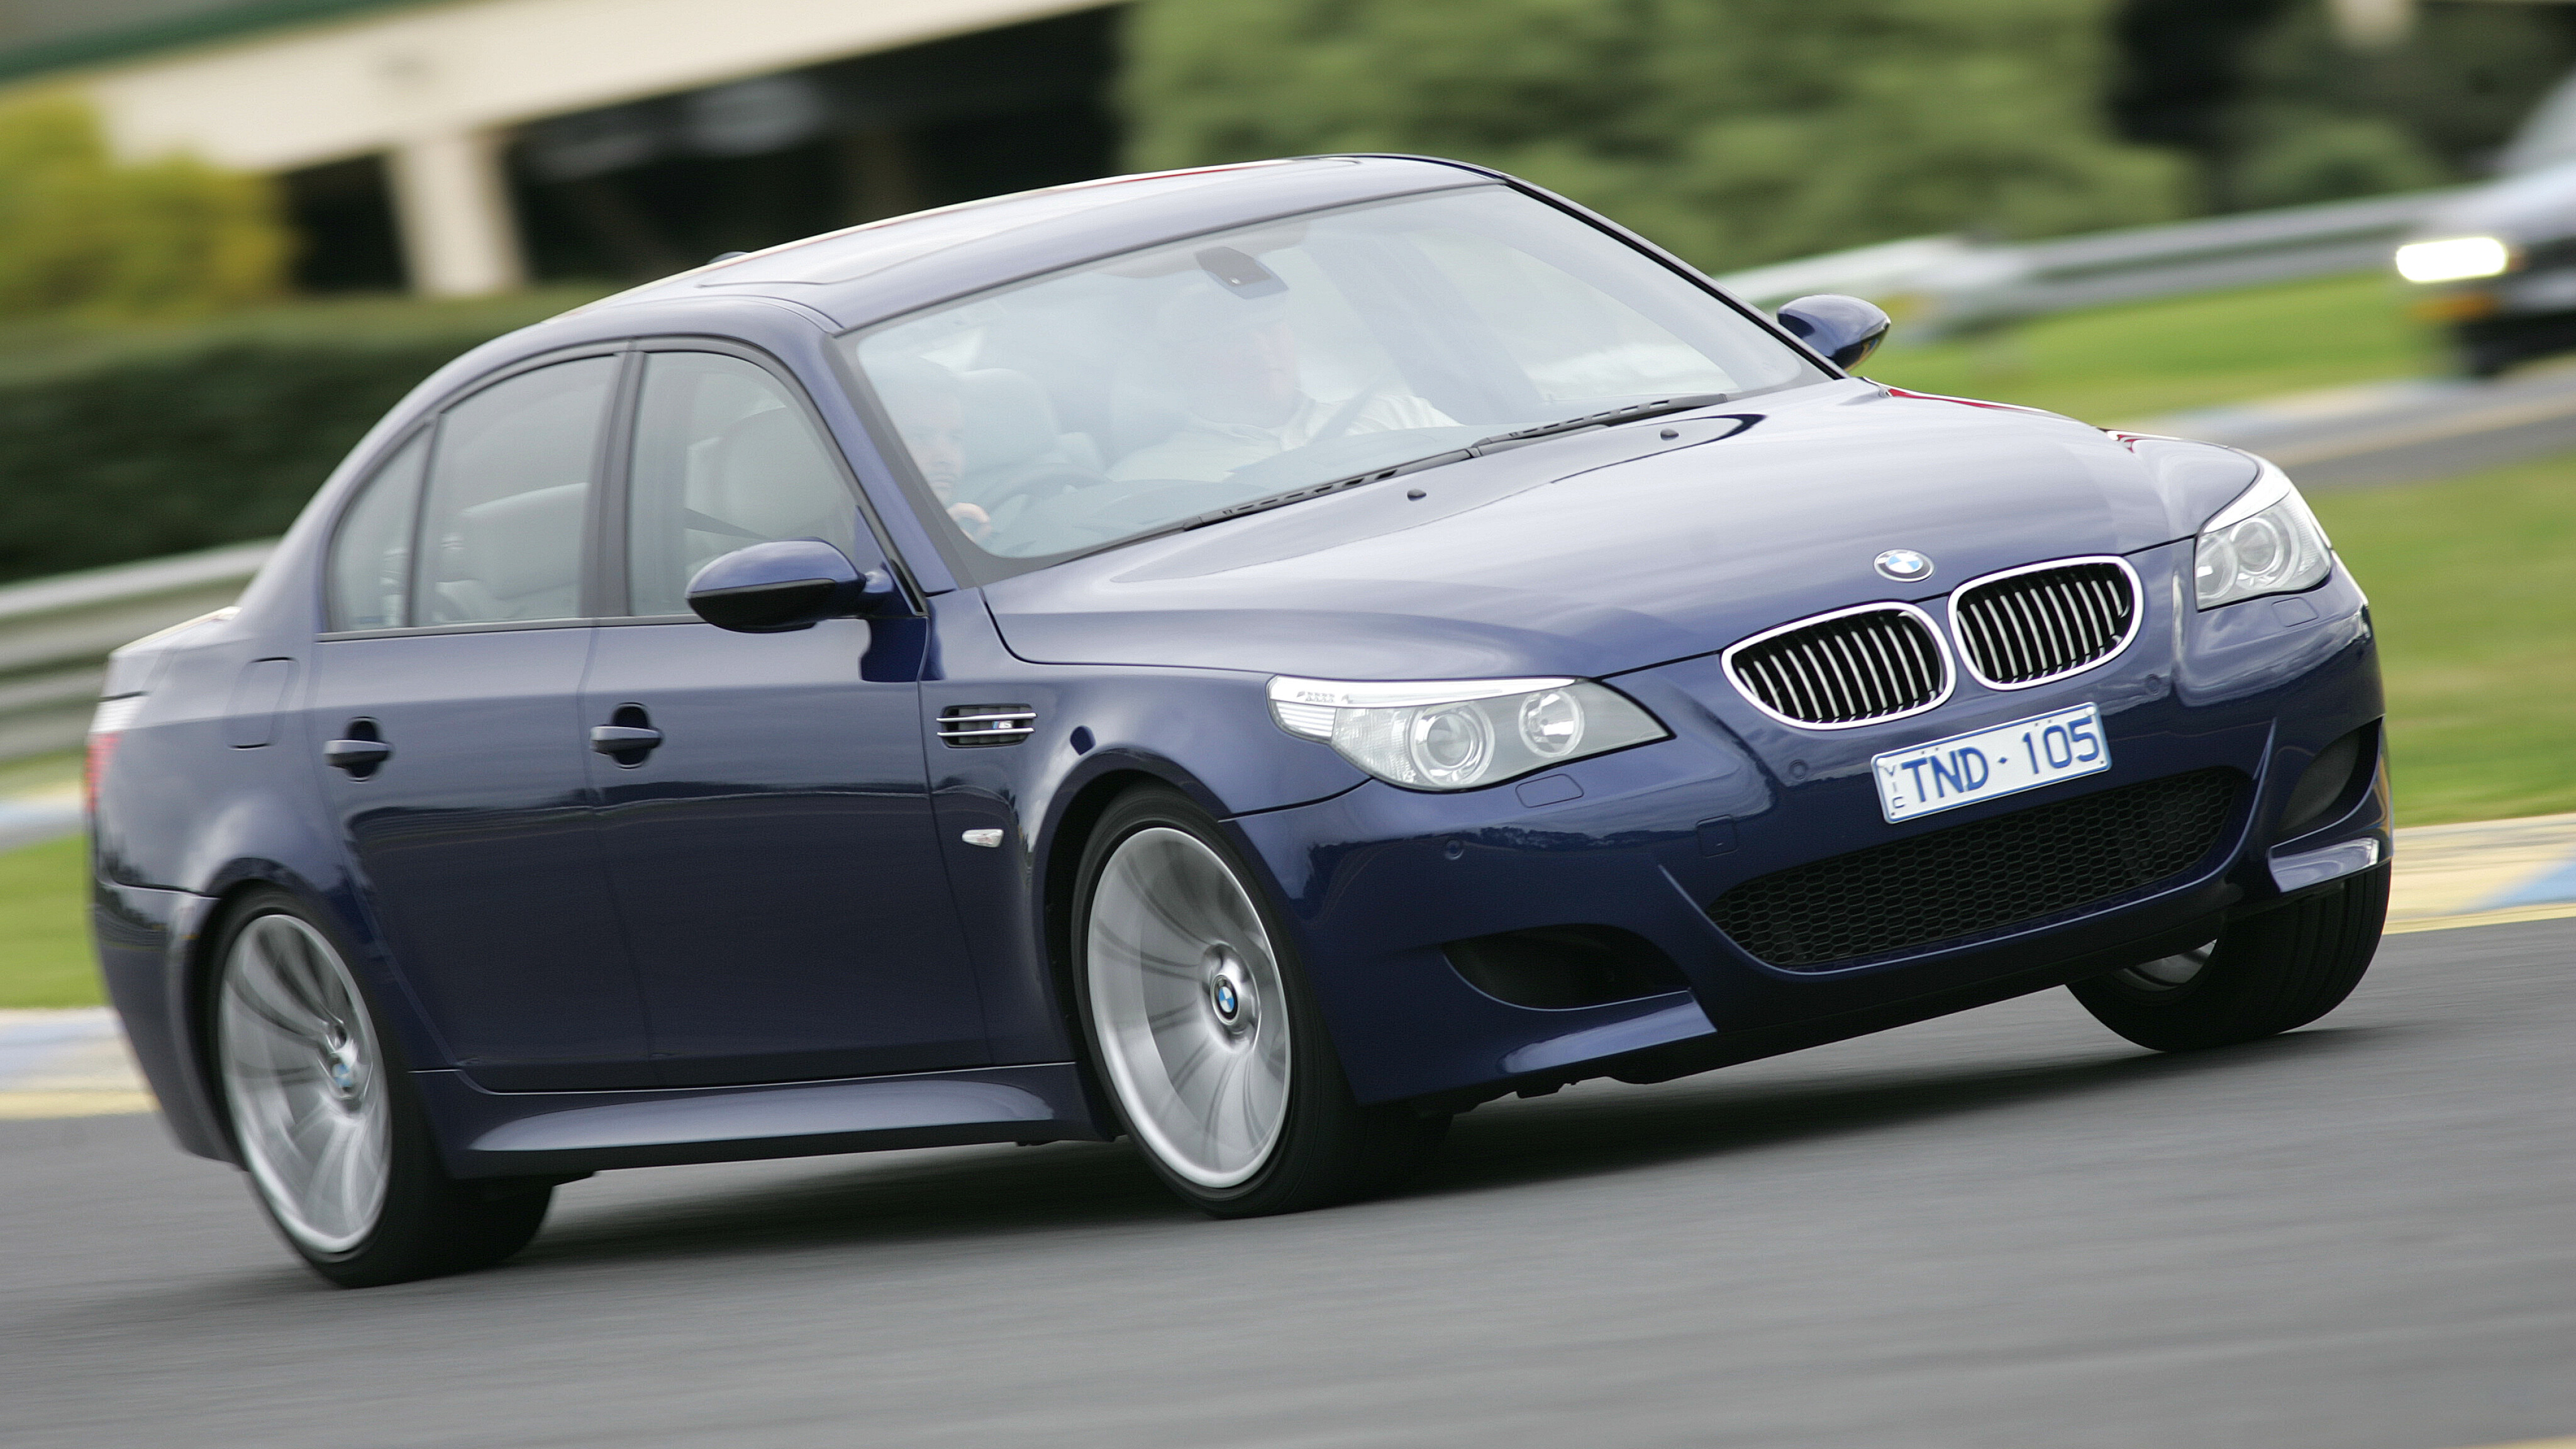 Used car buying guide: BMW M5 (E60)